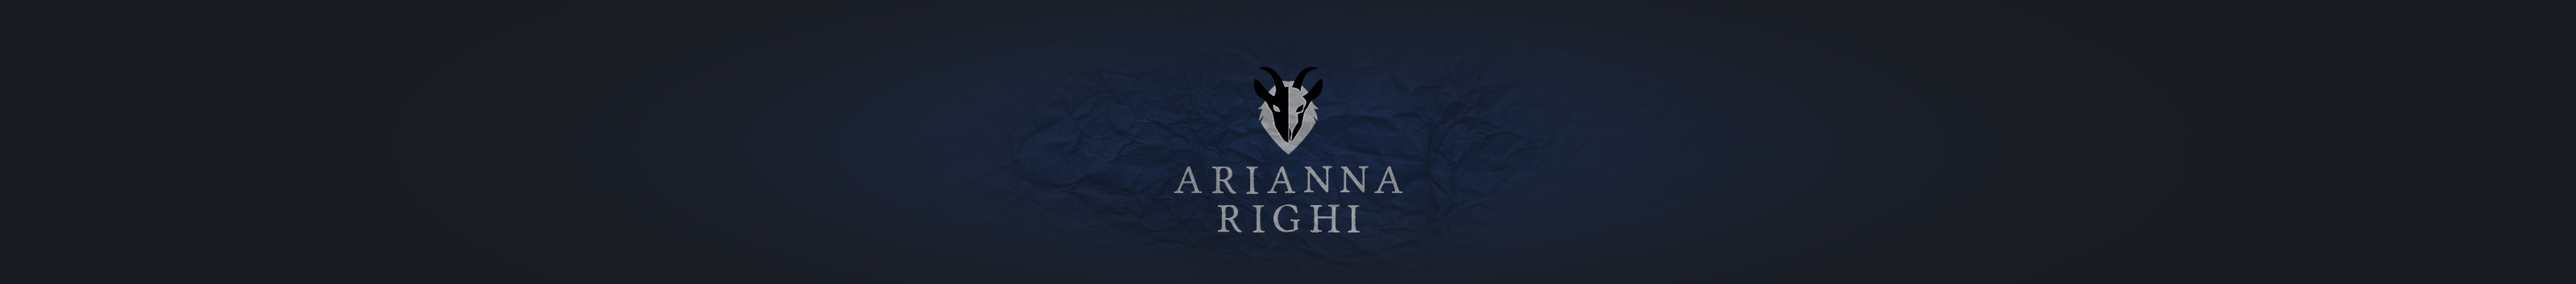 Arianna Righi's profile banner